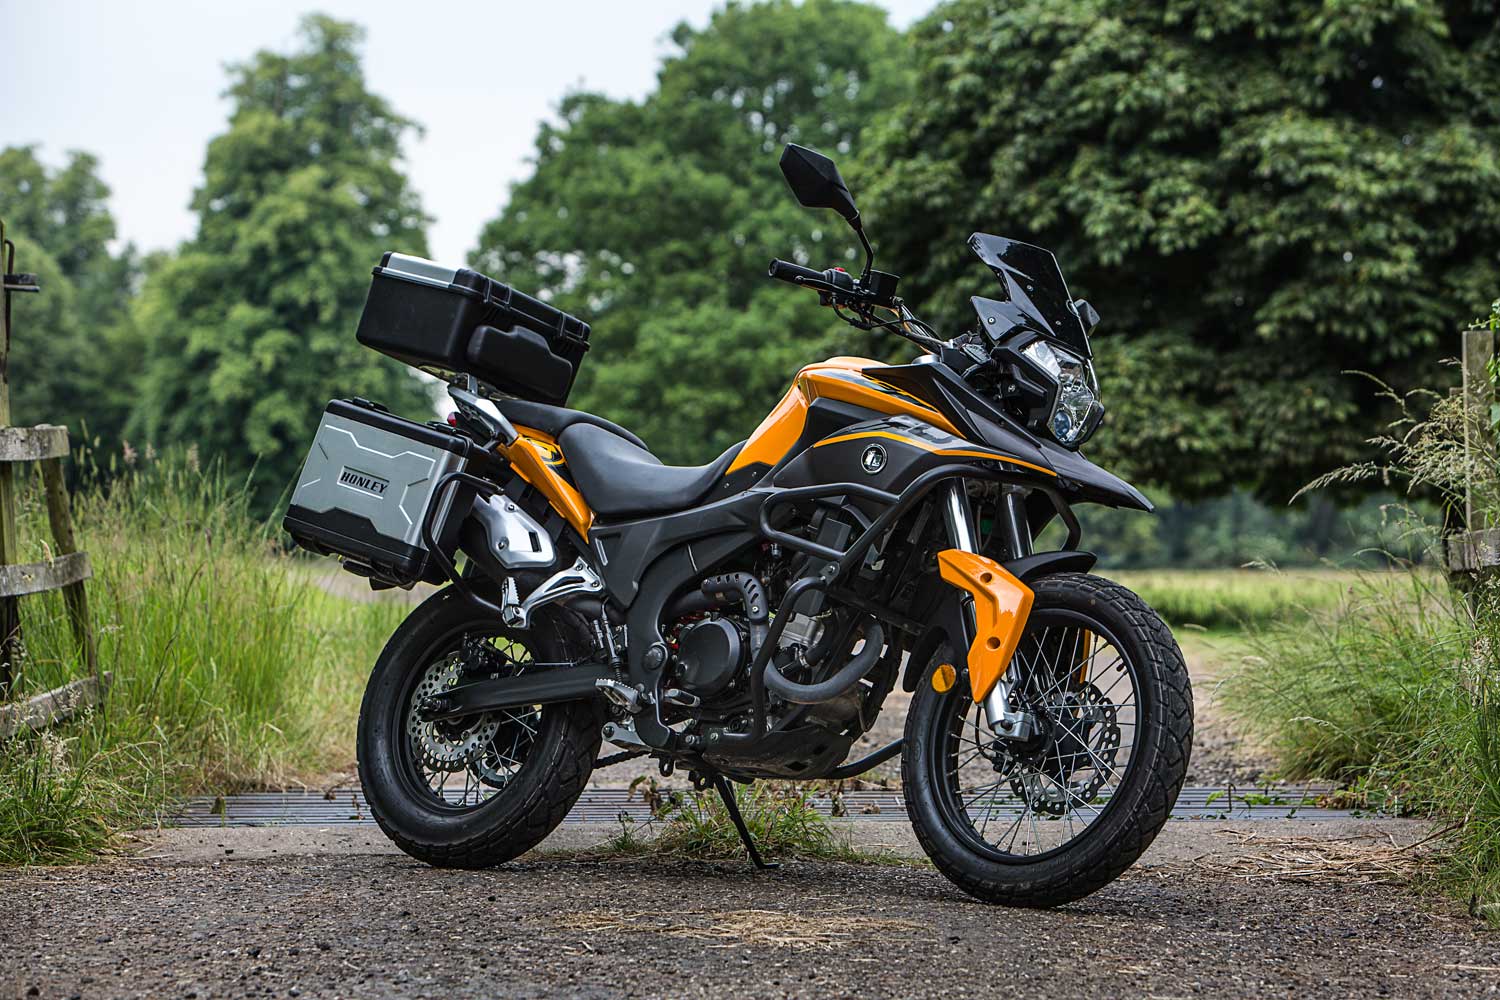 Tales from the Road: Featured Bikes - 250cc Adventure Bikes